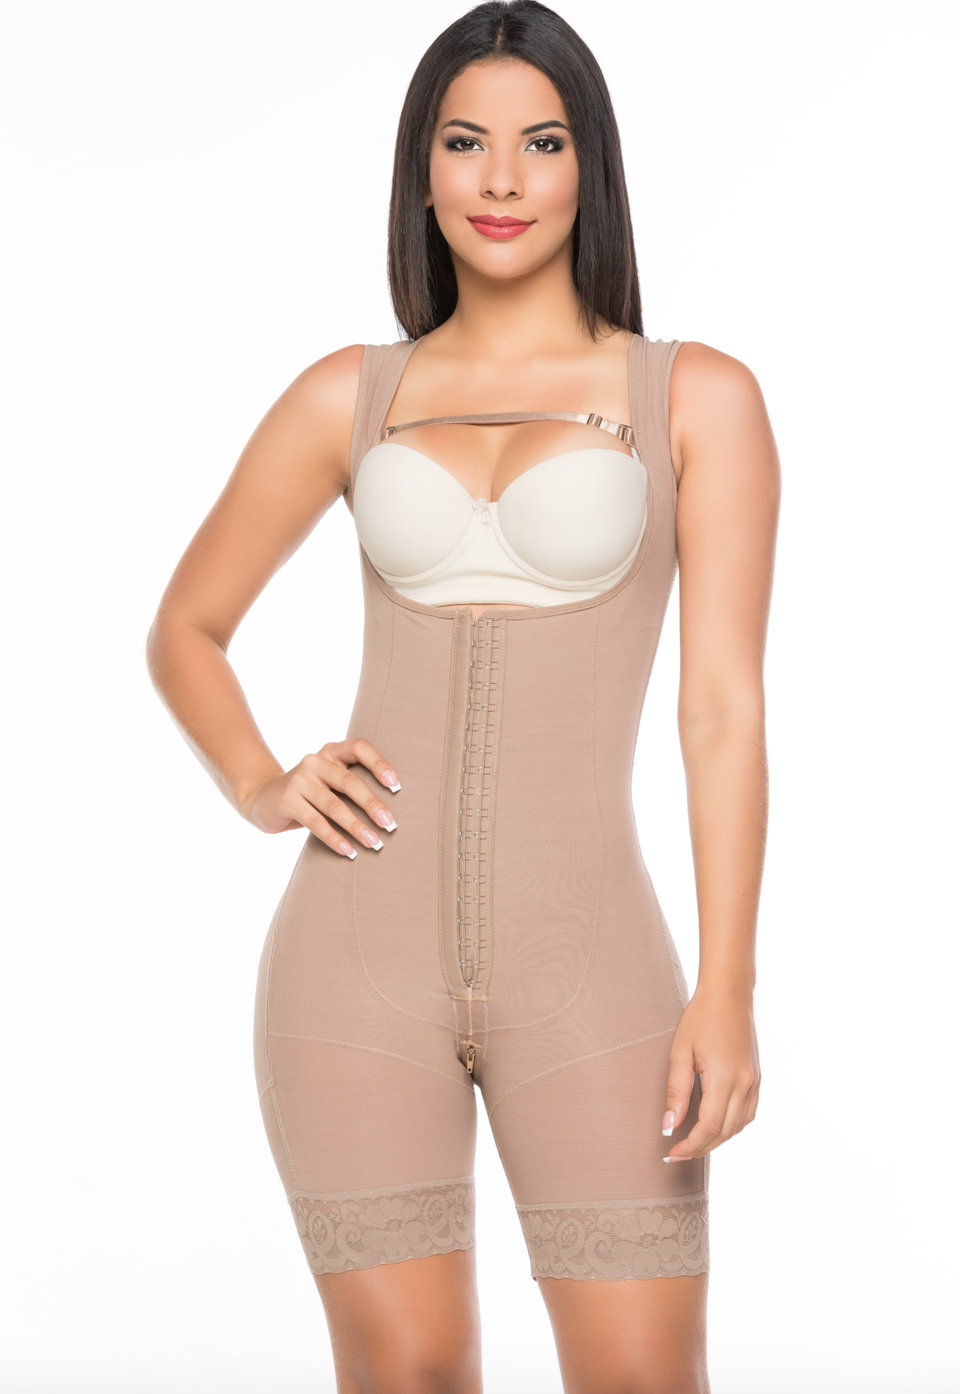 Dermawear Shapewear on Instagram: Experience ultimate confidence boost  with Dermawear 2.0 Slimmer Full Body Shapewear! Dive into unmatched comfort  and support with its premium fabric and targeted compression. Step into the  limelight